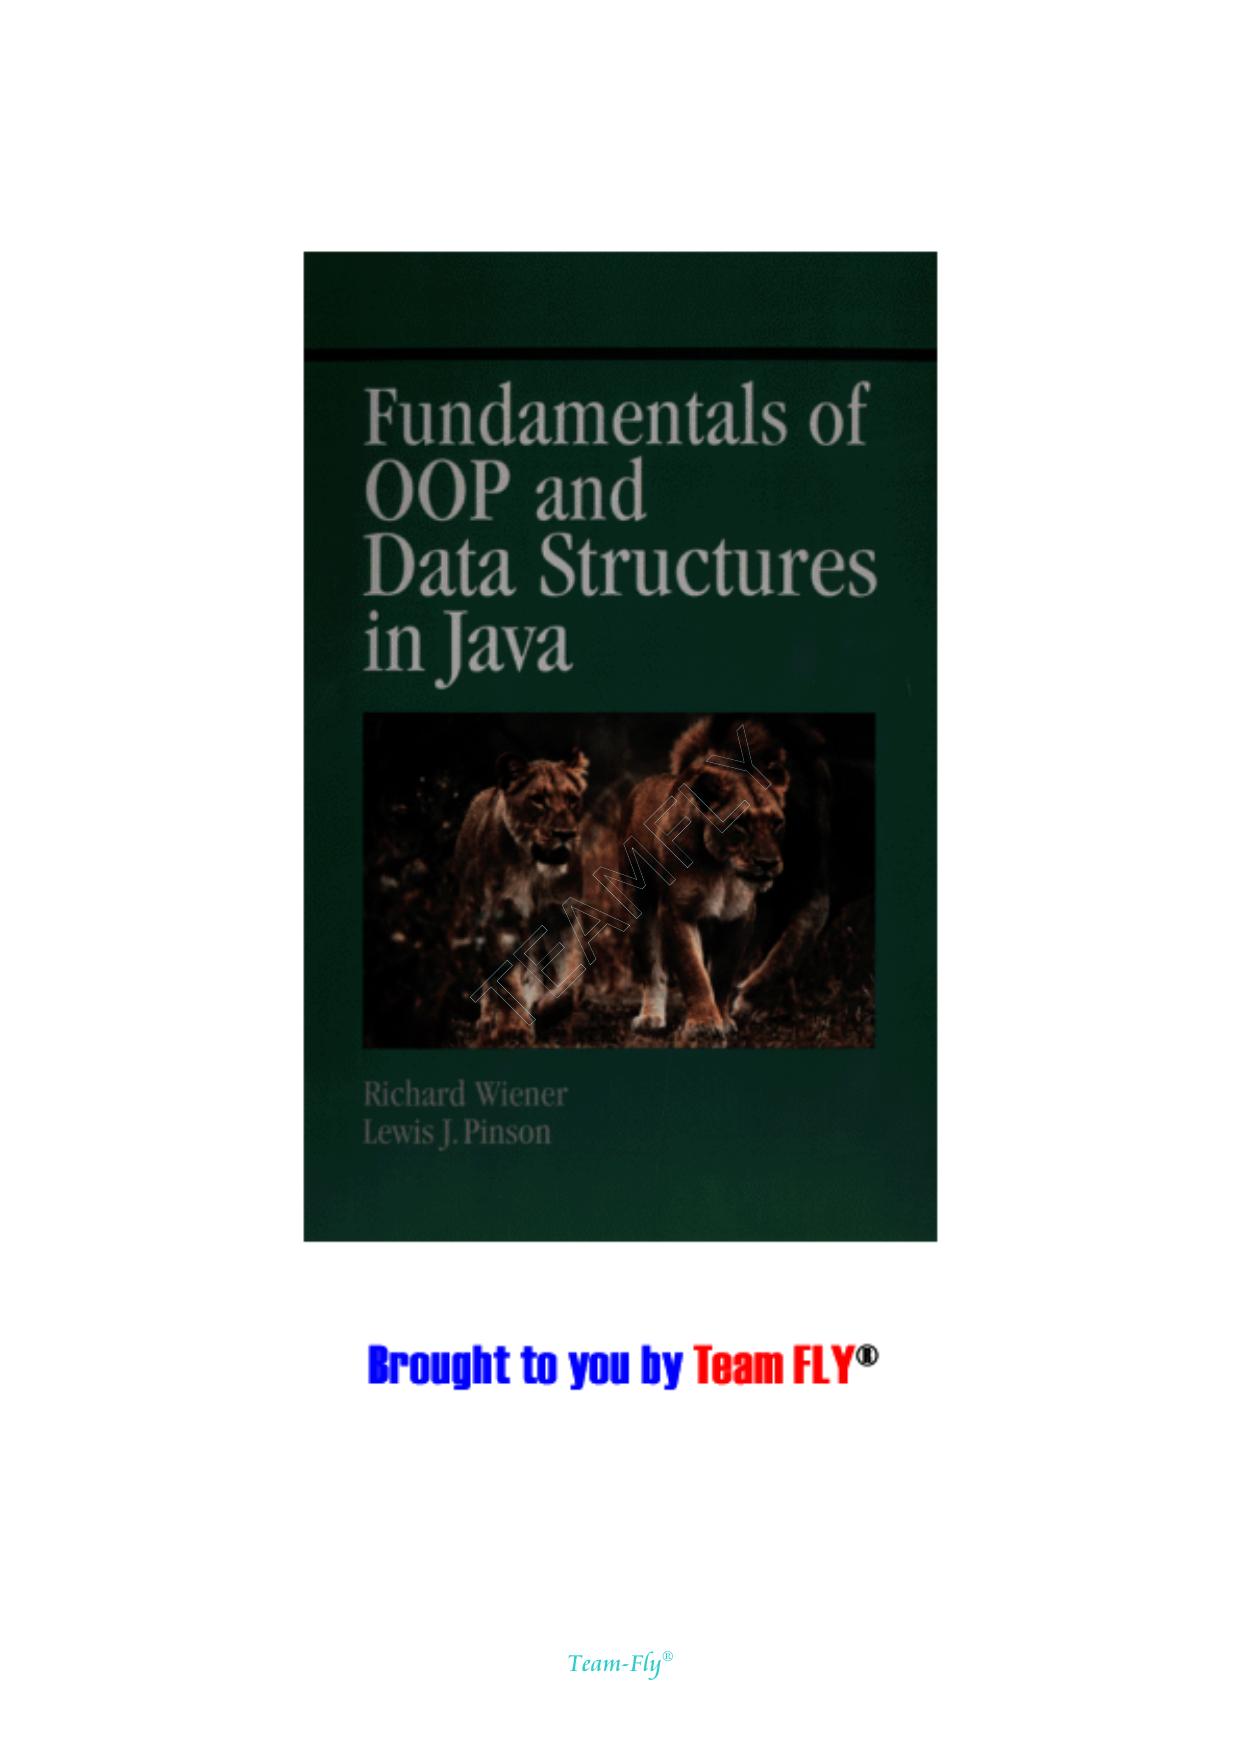 Fundamentals of OOP and Data Structures in Java ( PDFDrive.com )